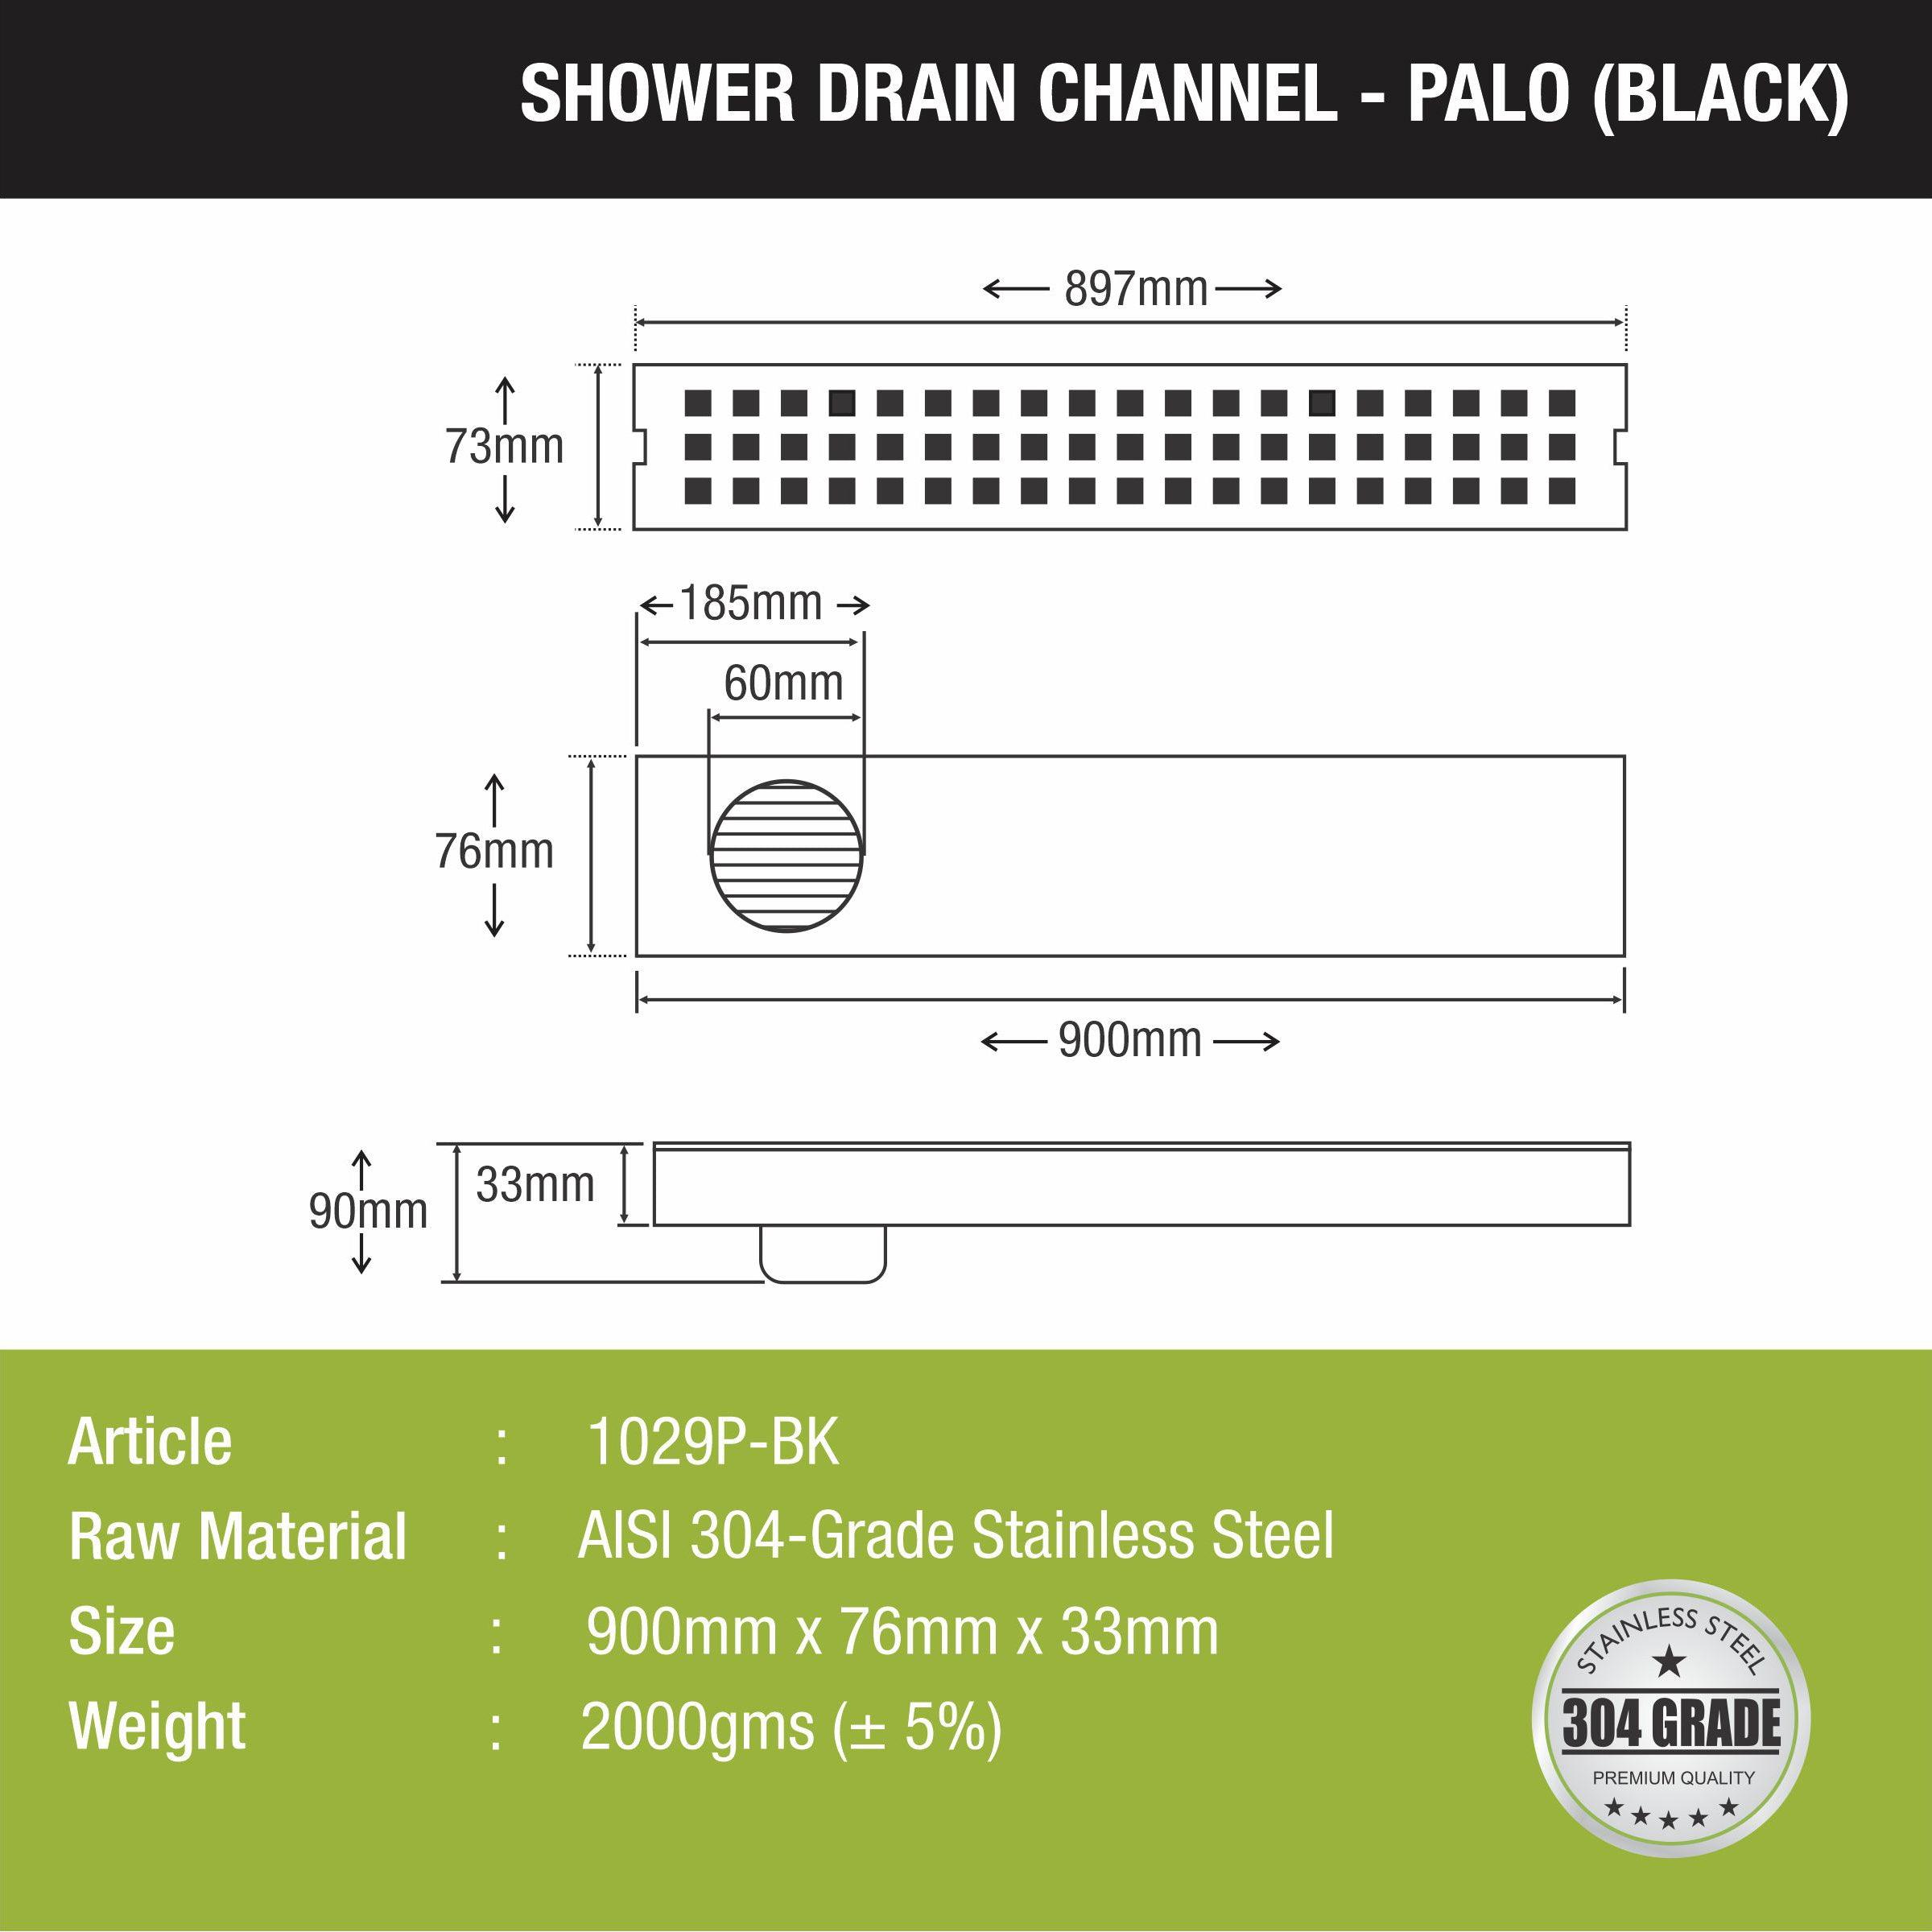 Palo Shower Drain Channel - Black (36 x 3 Inches) size and measurement